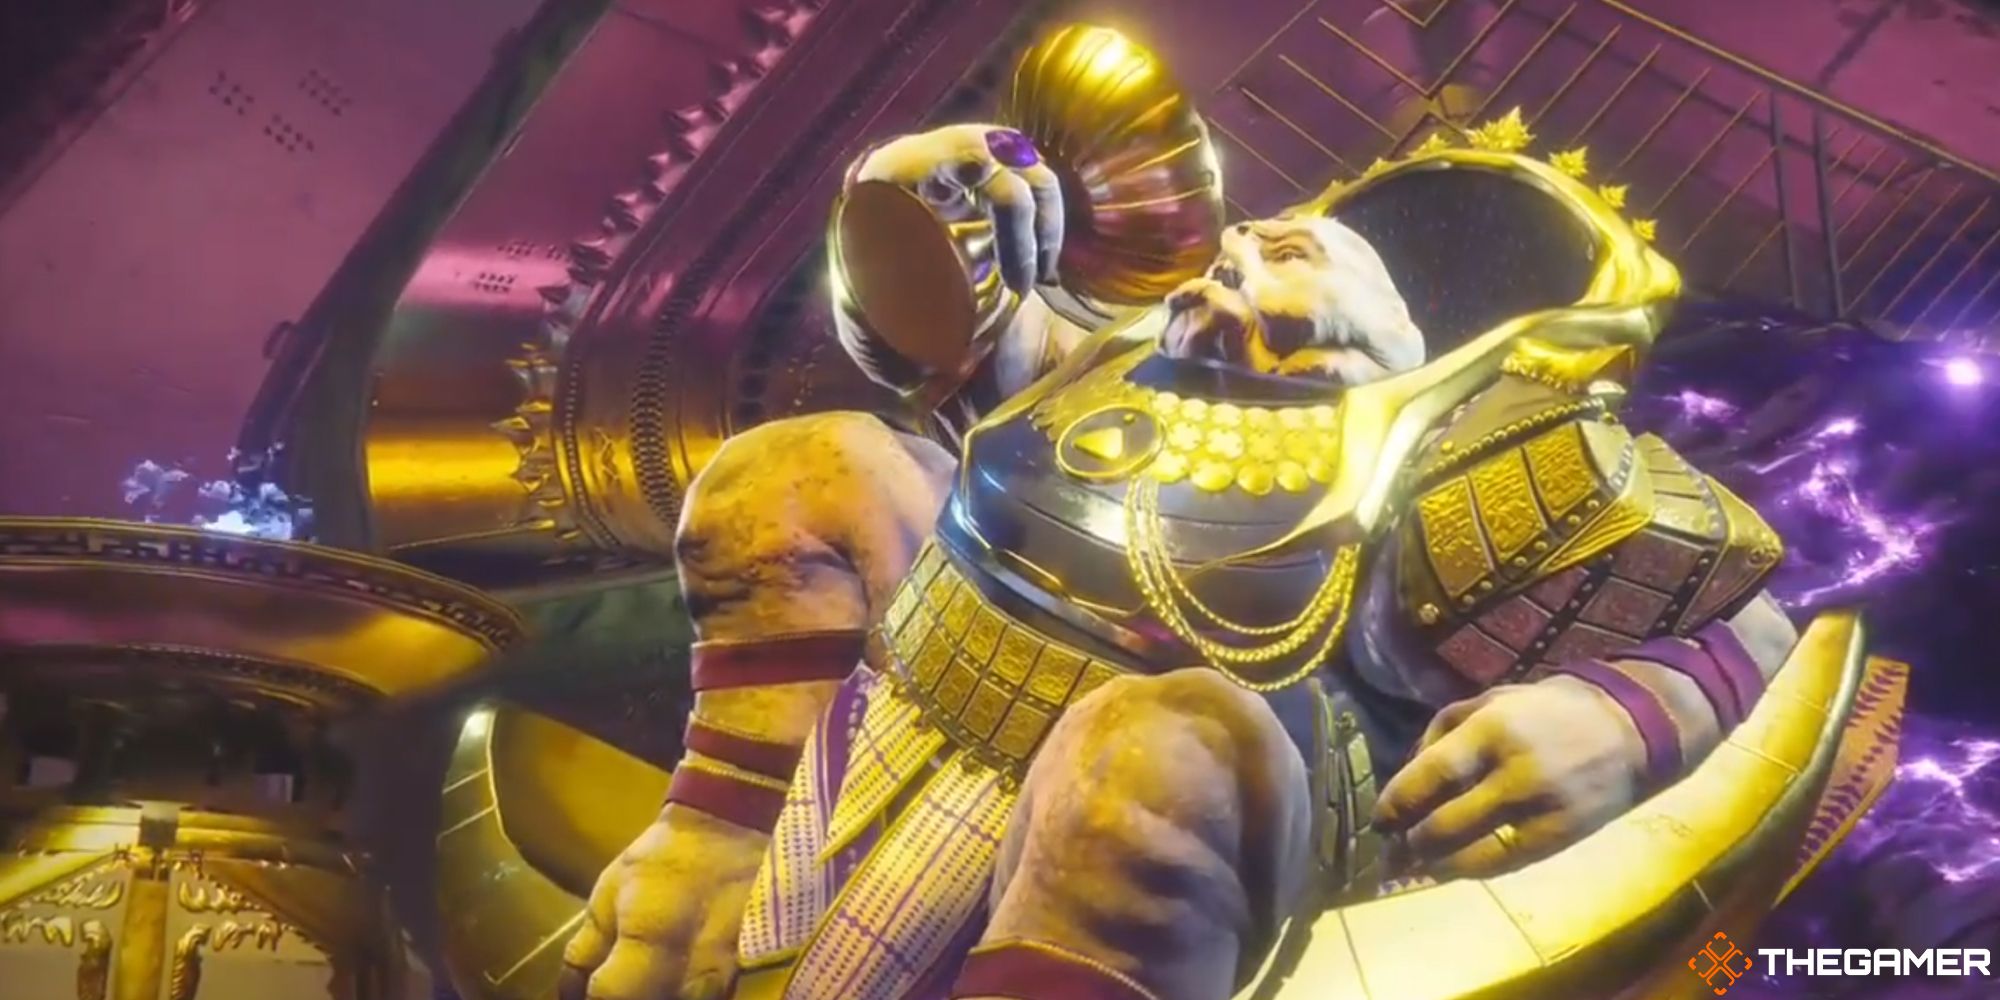 Emperor Calus sitting on his throne  from Destiny 2